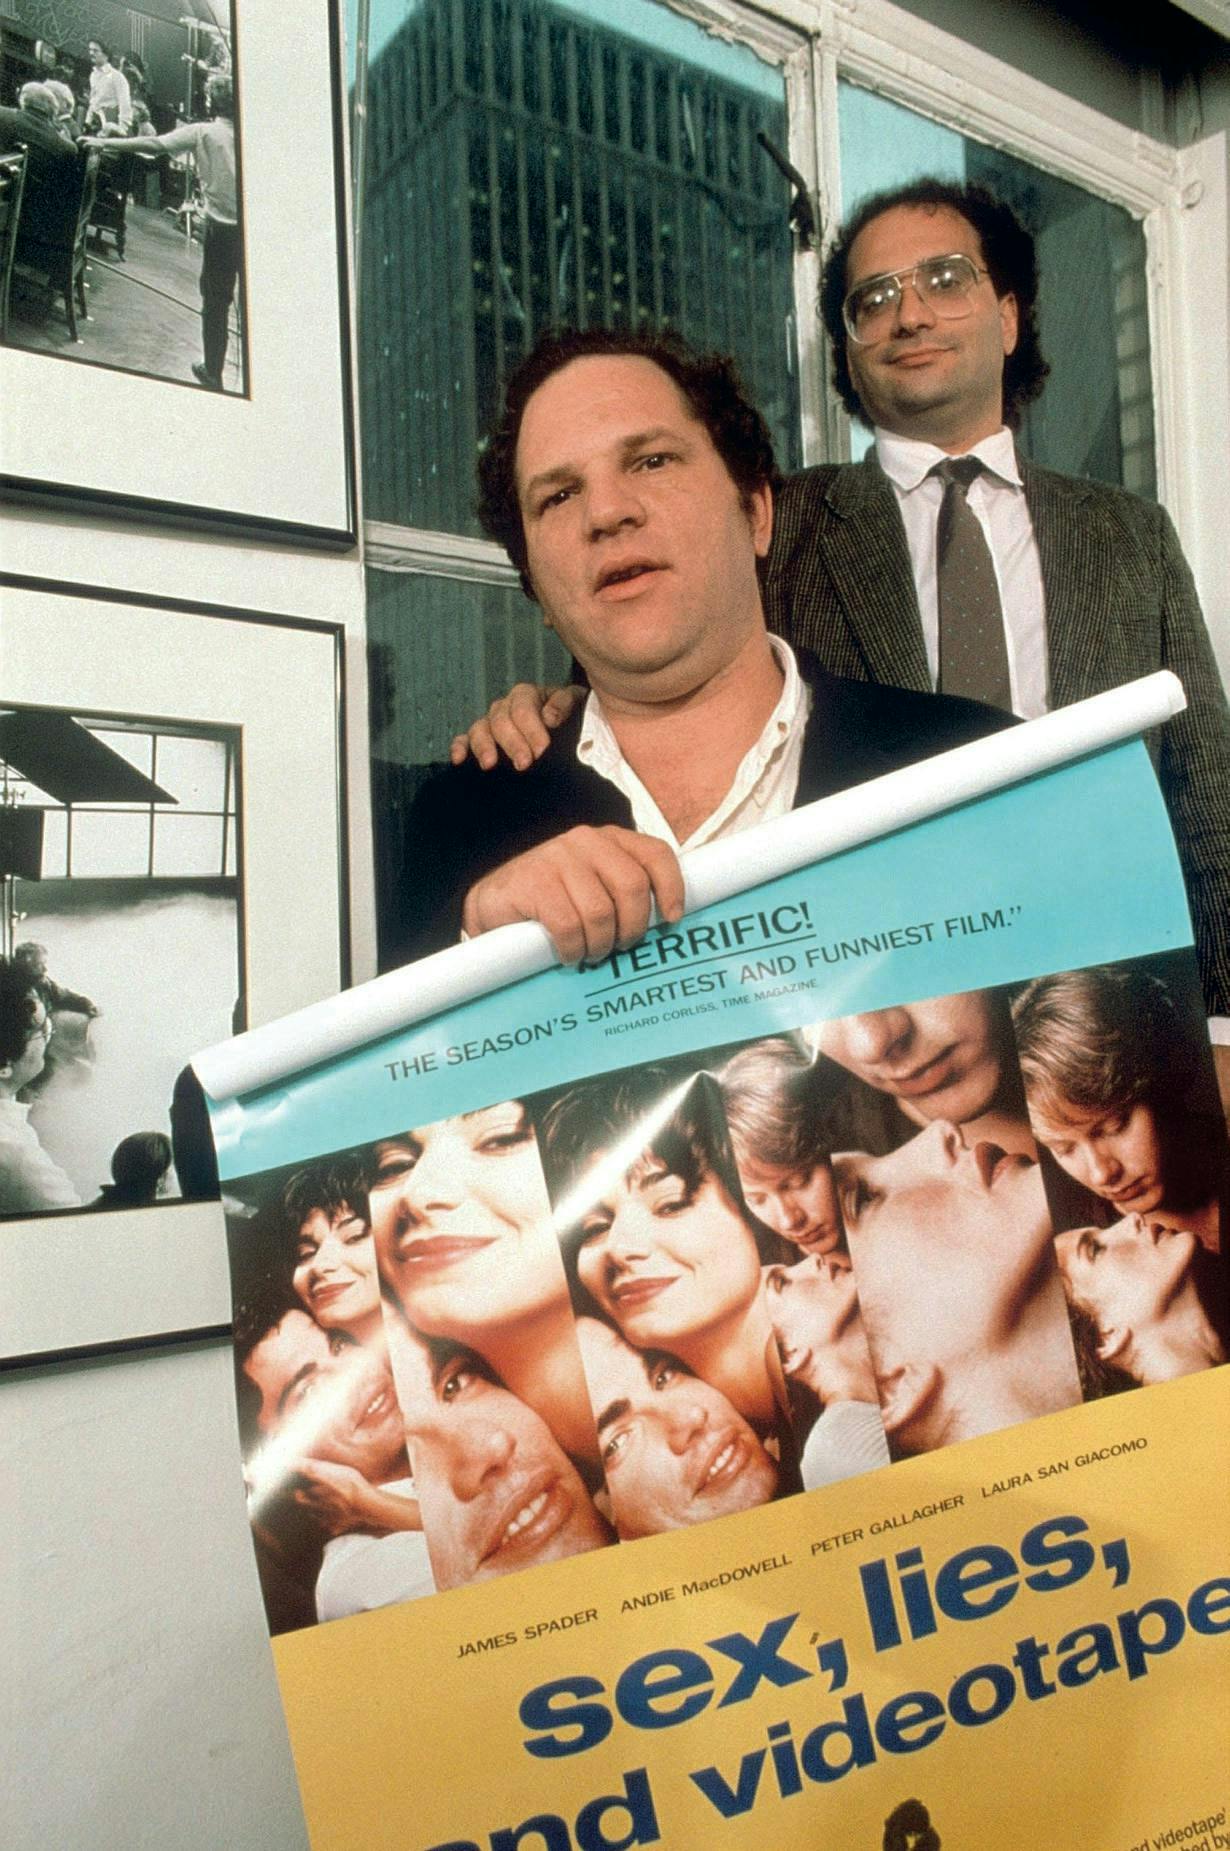 harvey bob weinstein los angeles america 1989 film producer brother brothers with others personality 636868 tie accessories accessory person human advertisement poster flyer paper brochure